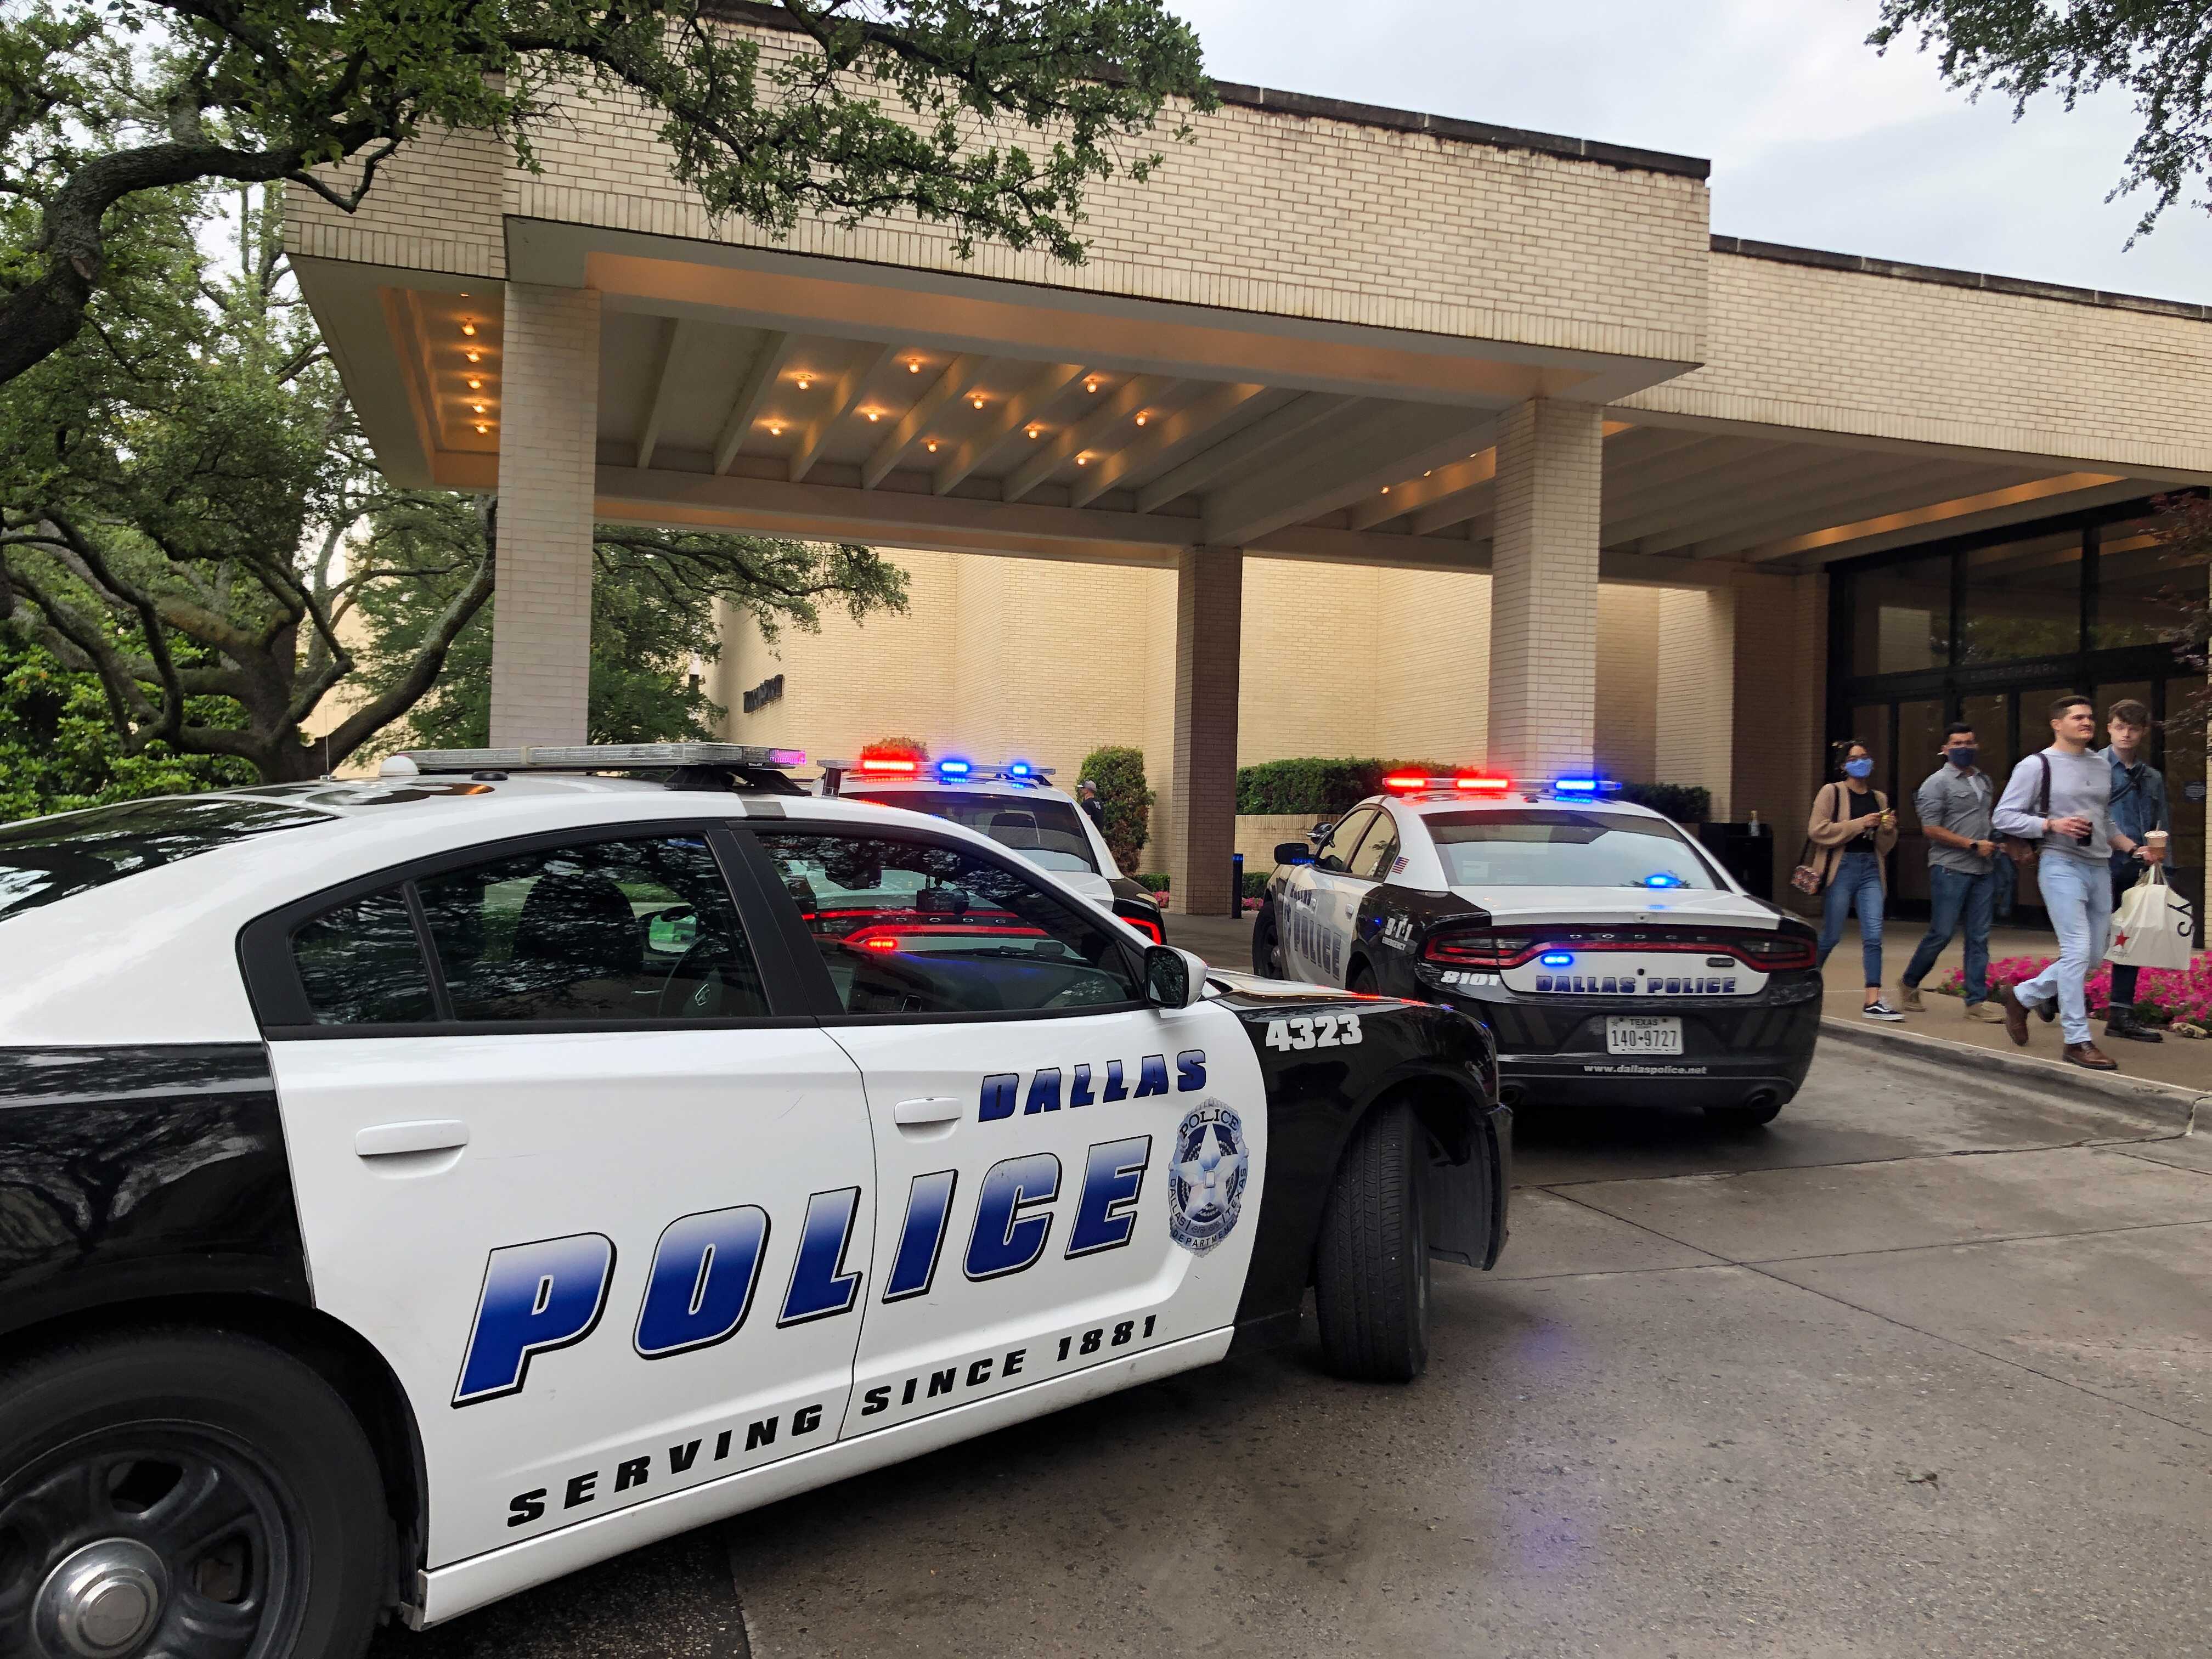 Report of shooting at Dallas' NorthPark Center mall was a